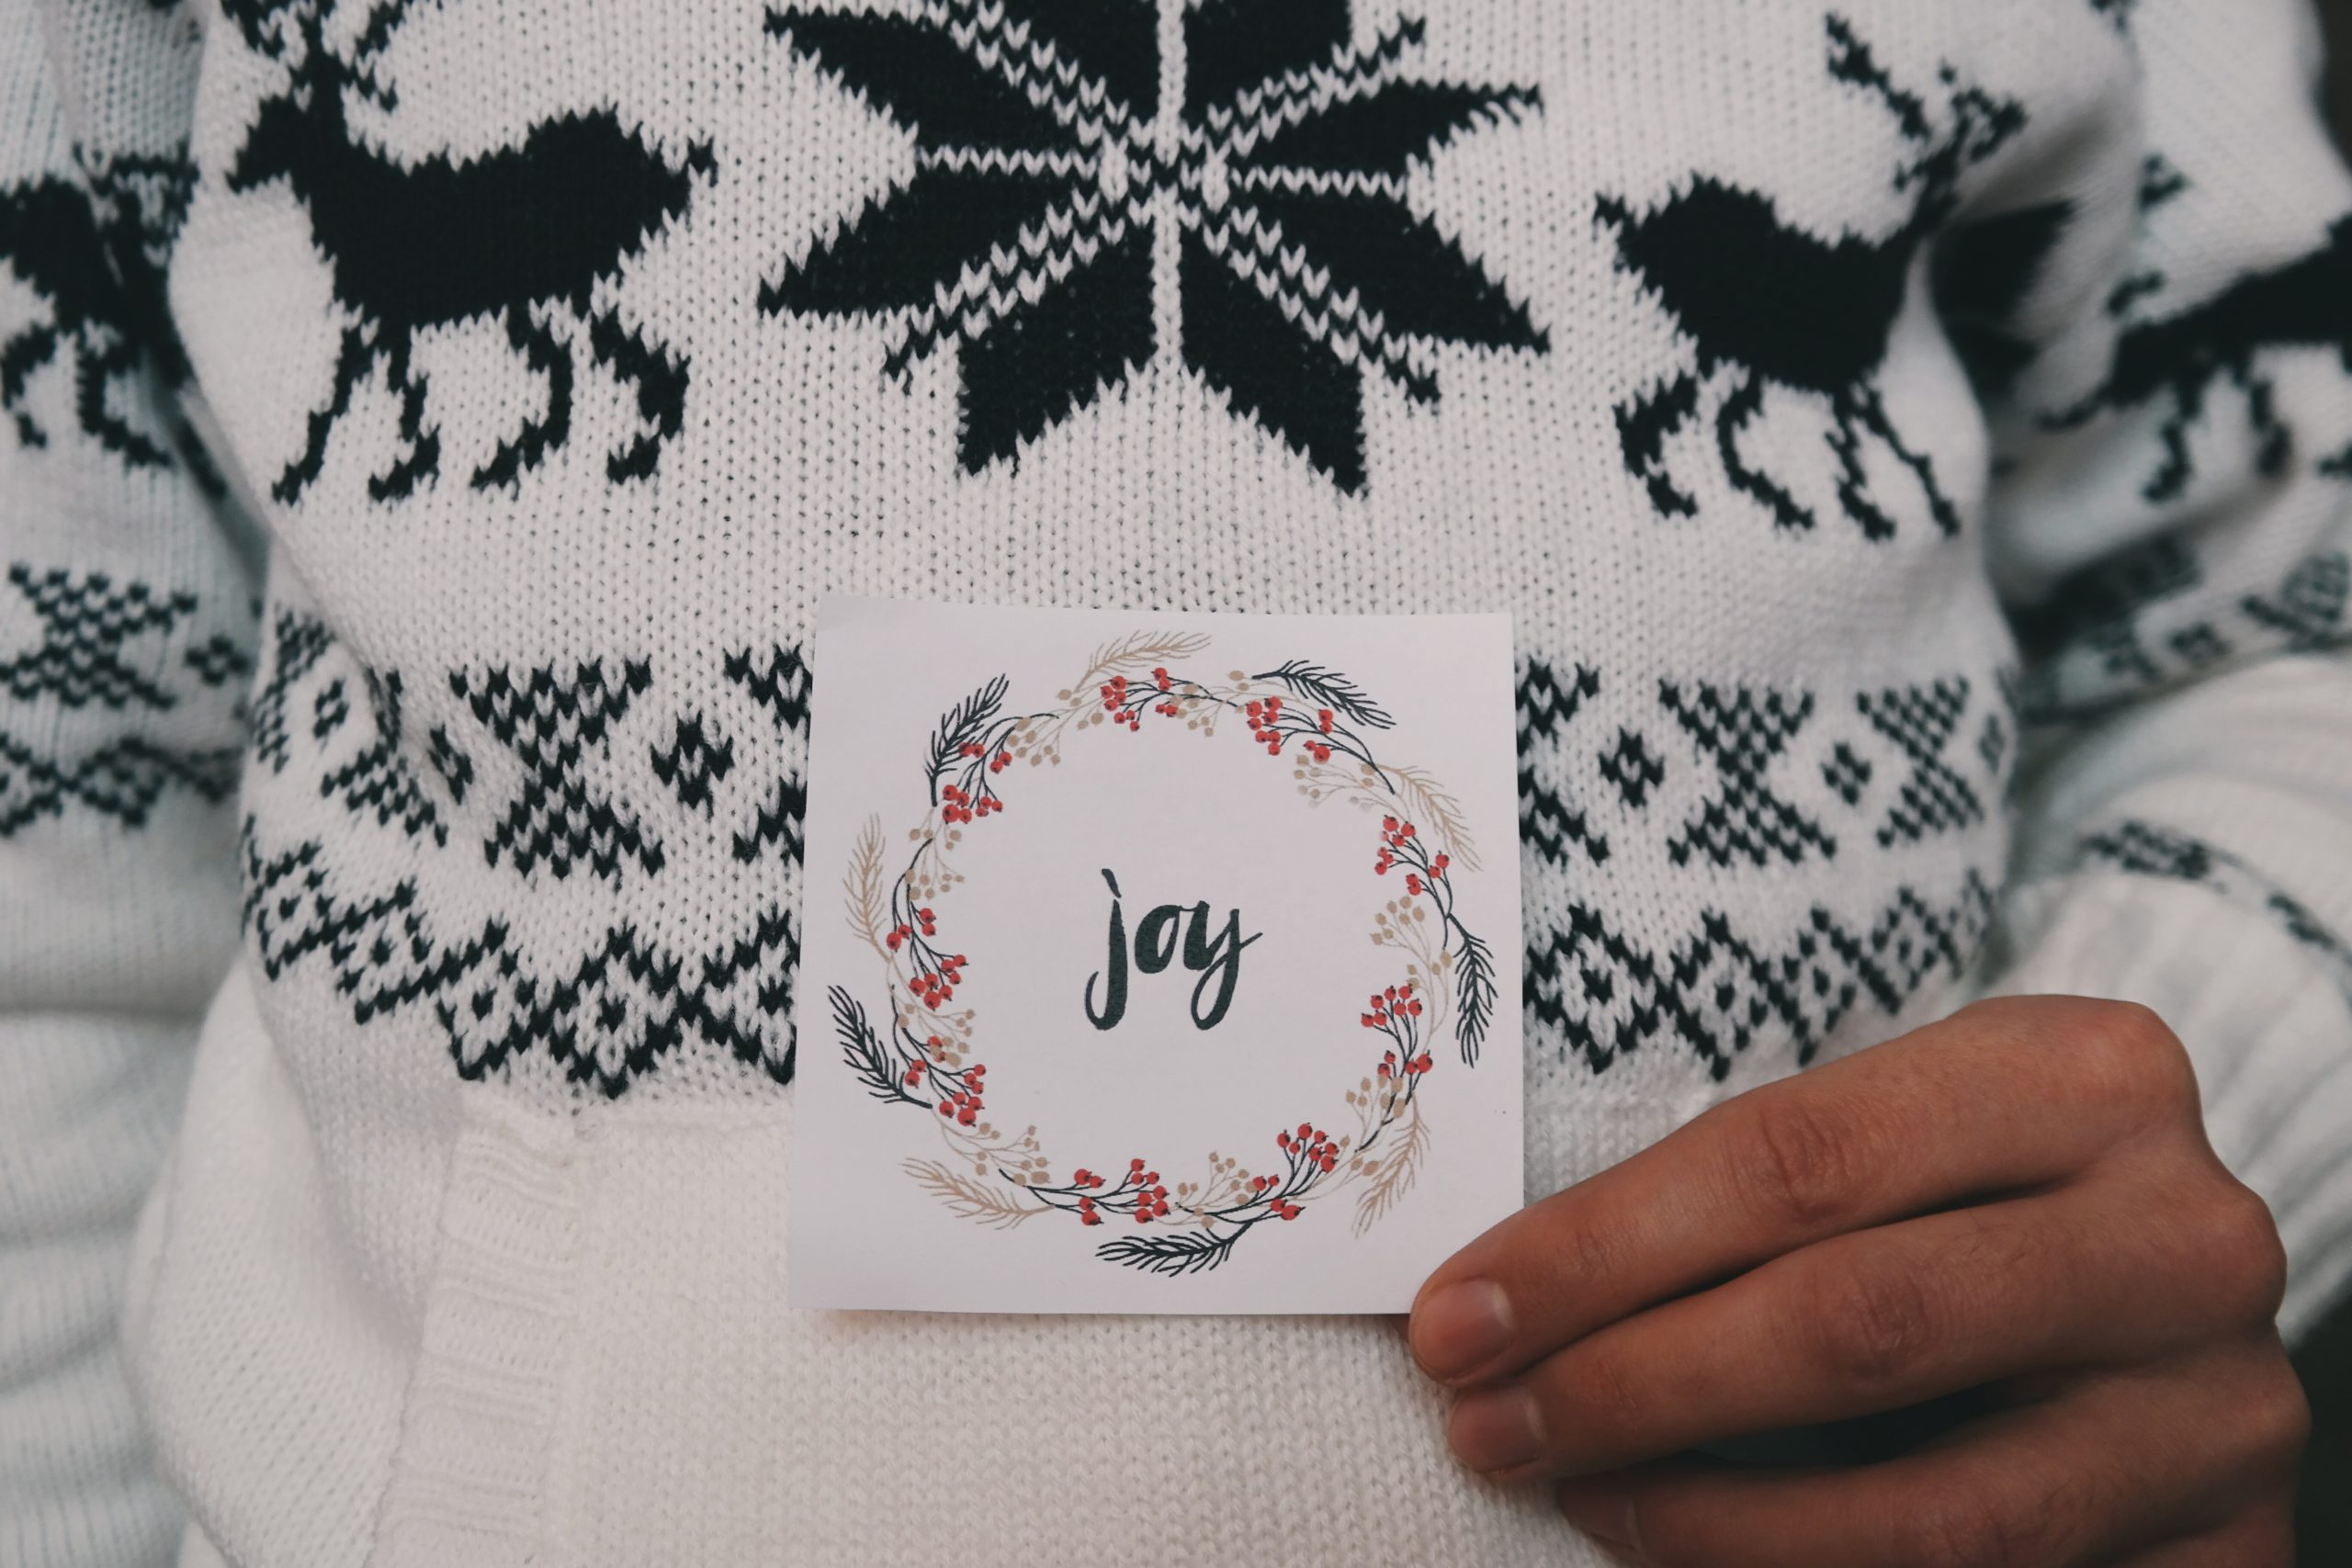 joy and gratitude during the holidays